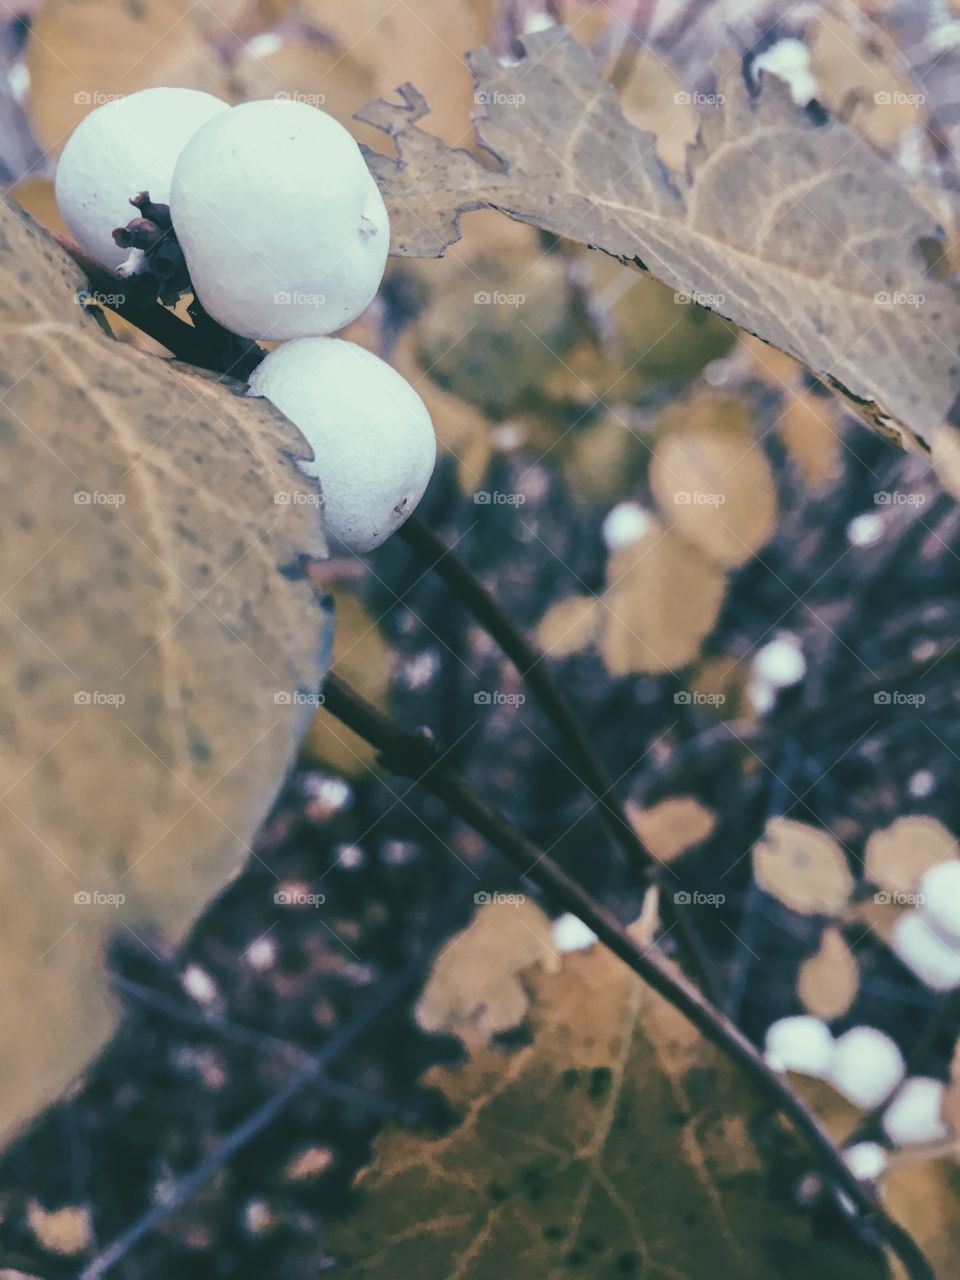 Unknown berries - like tiny snowballs. 